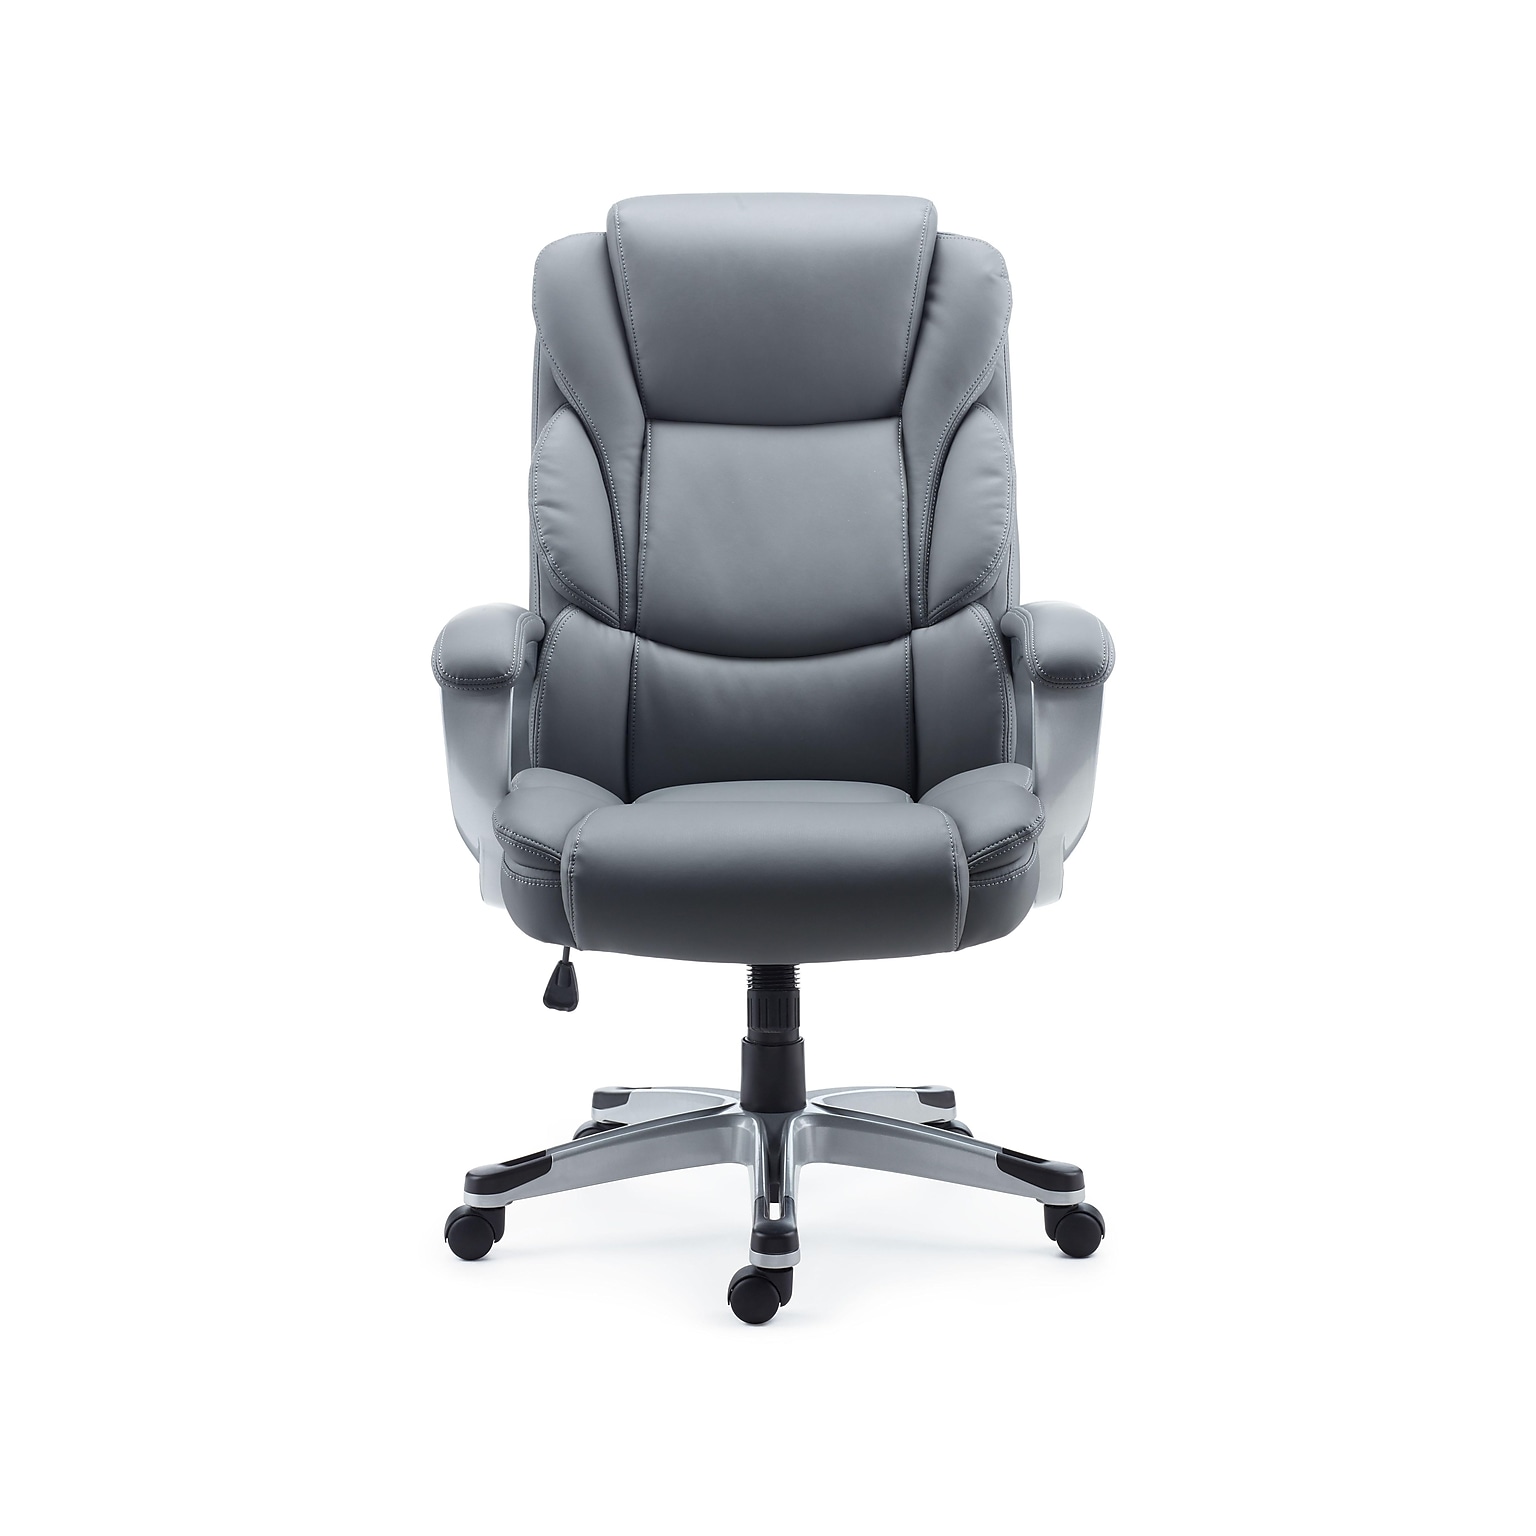 Staples Mcallum Bonded Leather Manager Chair (Gray)